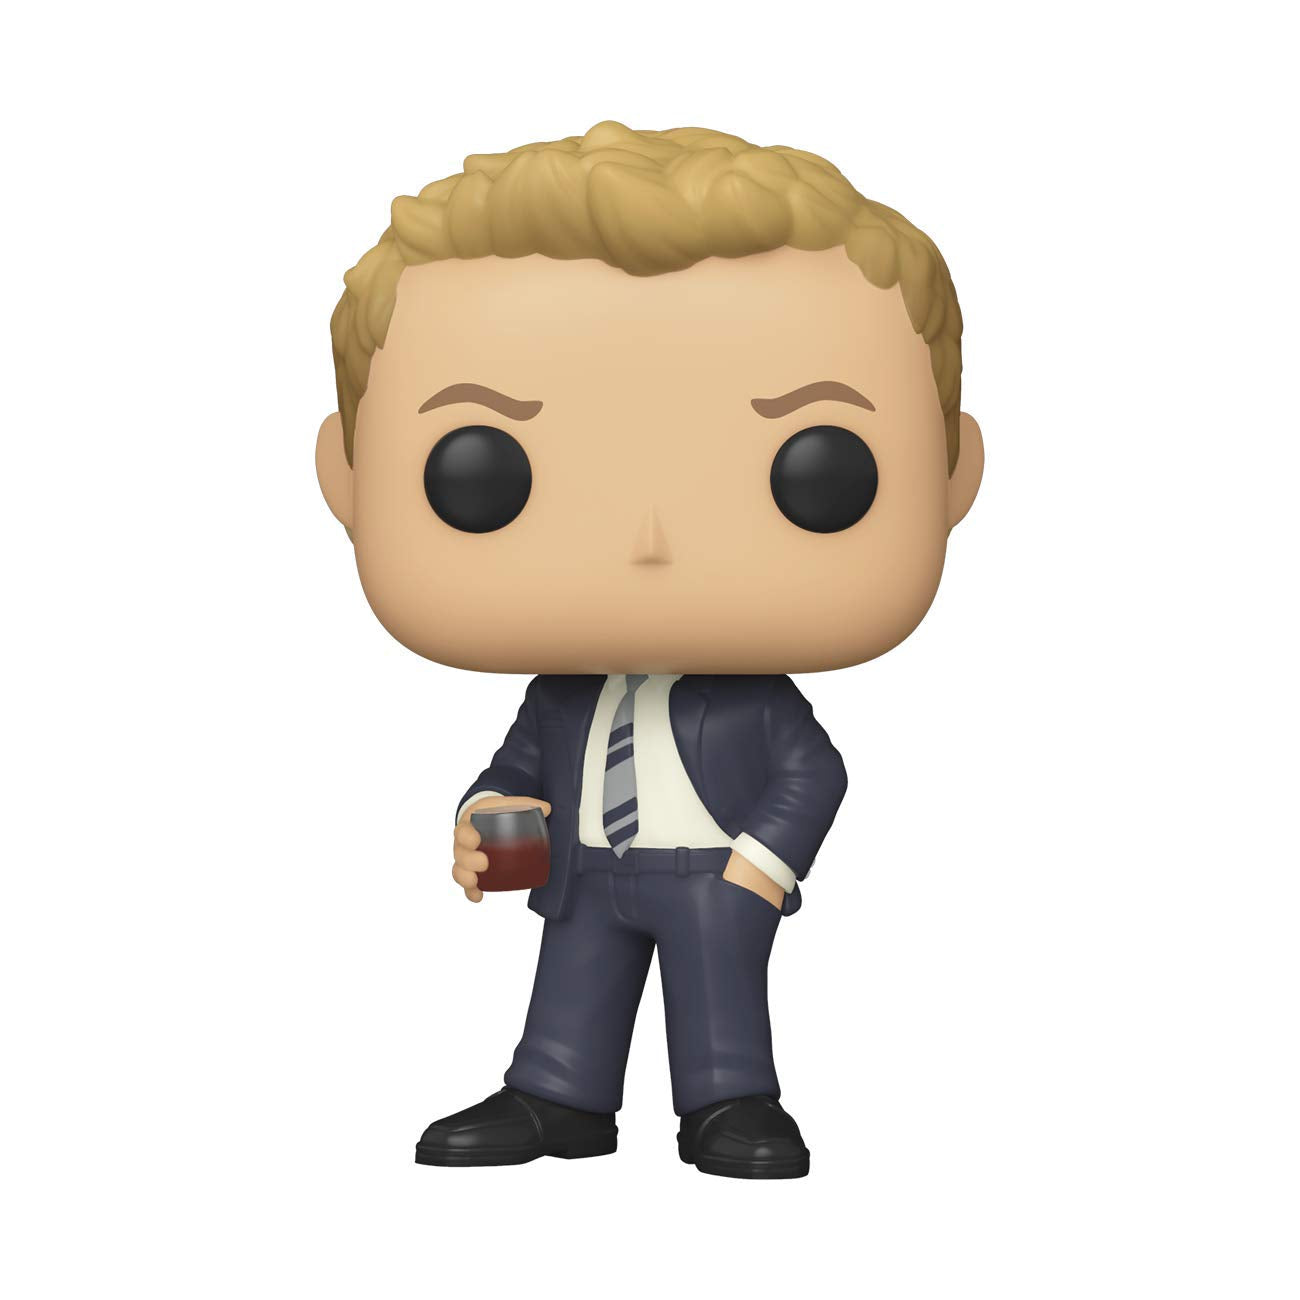 Funko POP! Television: How I Met Your Mother - Barney Stinson #1043